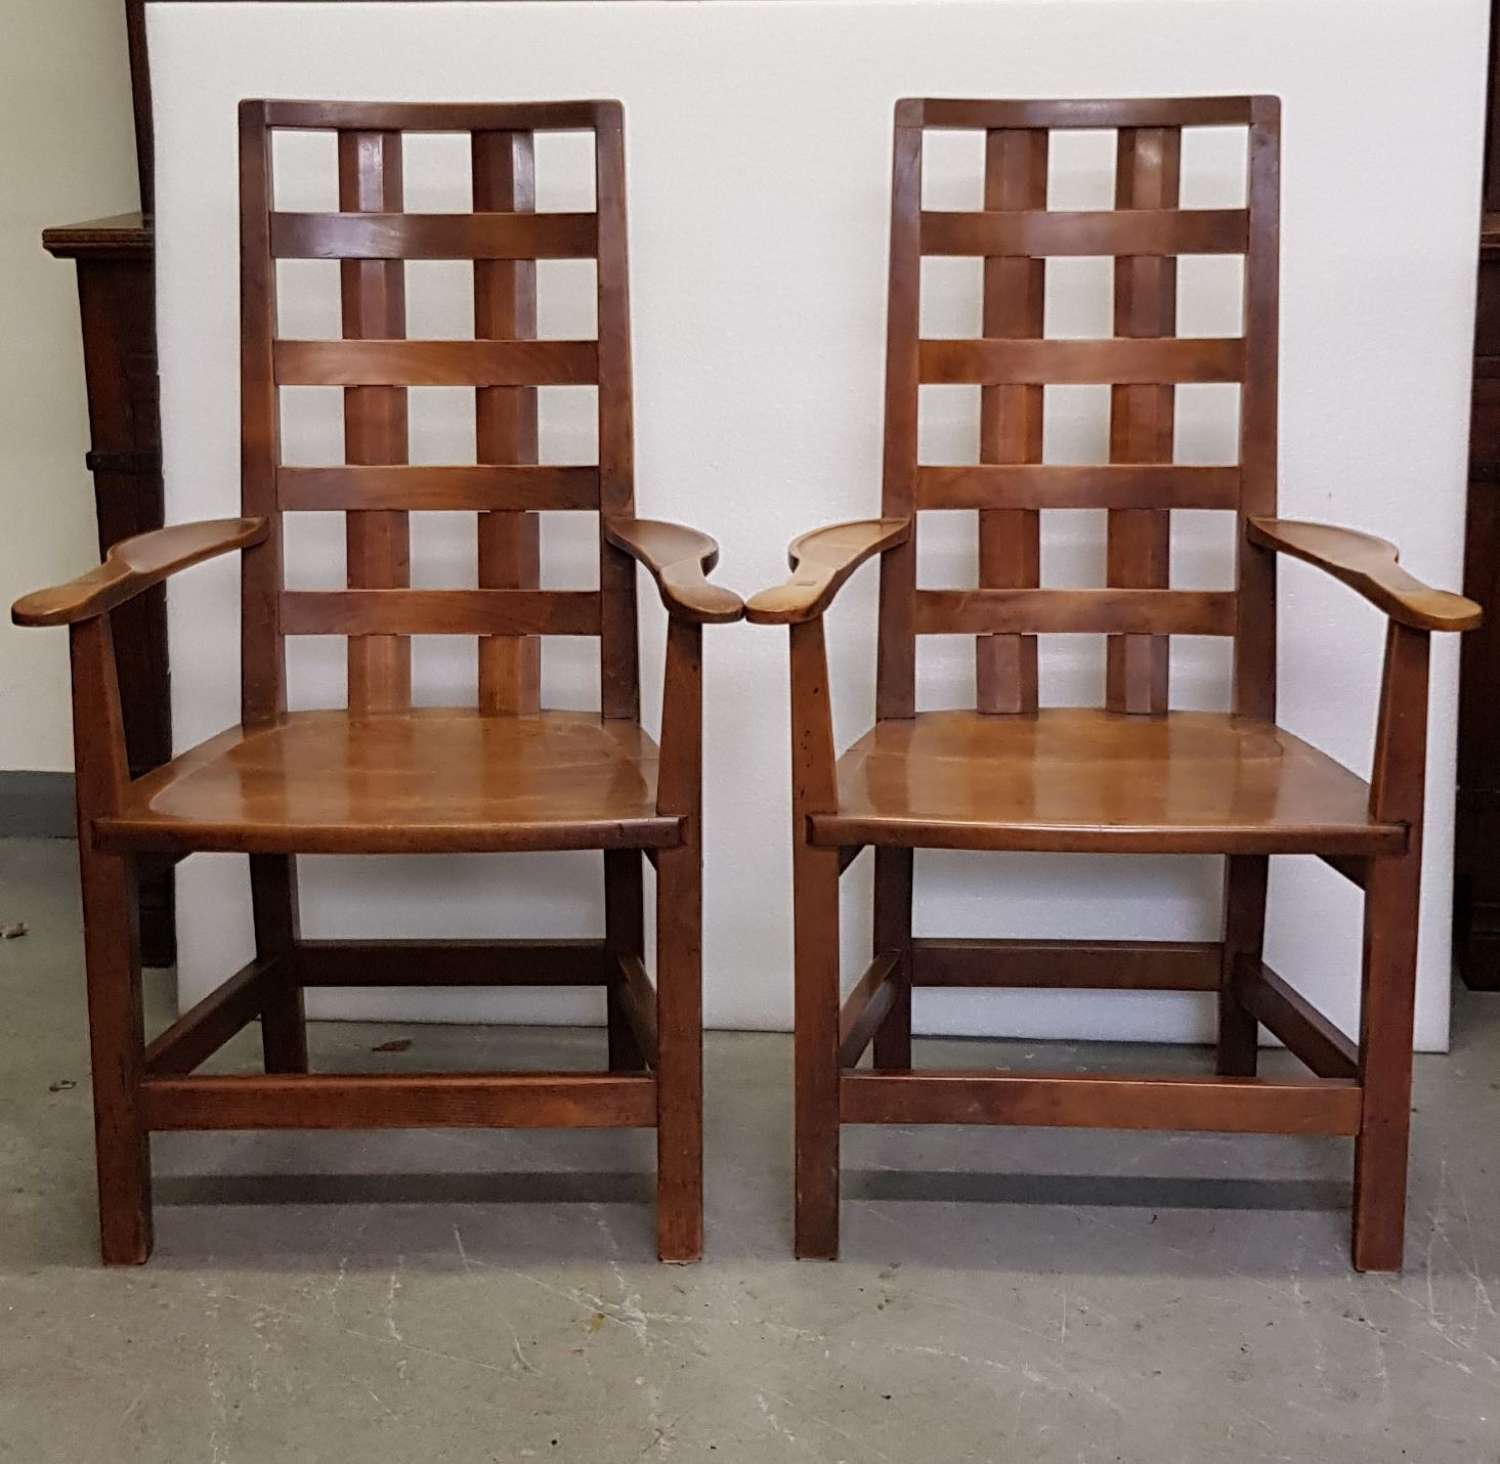 Rare pair of Arts & Crafts Cotswold School armchairs by Ernest Gimson